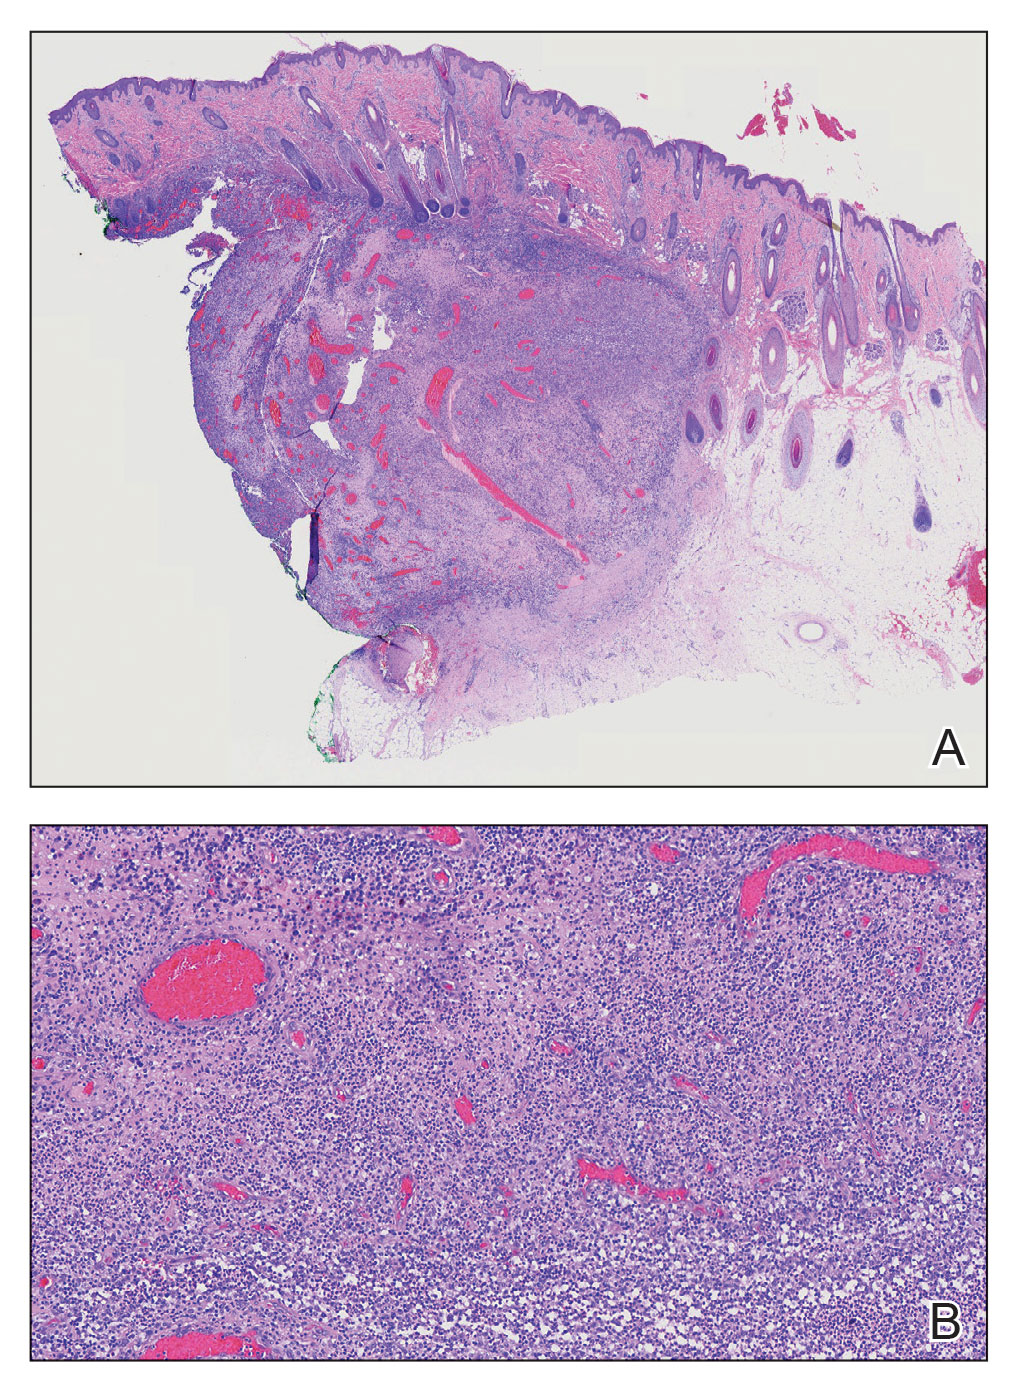 A, Histopathology revealed a relatively well-demarcated zone of deep dermal mixed inflammation with associated dilated vasculature with no true cyst or neoplasm (H&E, original magnification ×20). B, Admixed acute and granulomatous inflammation was present